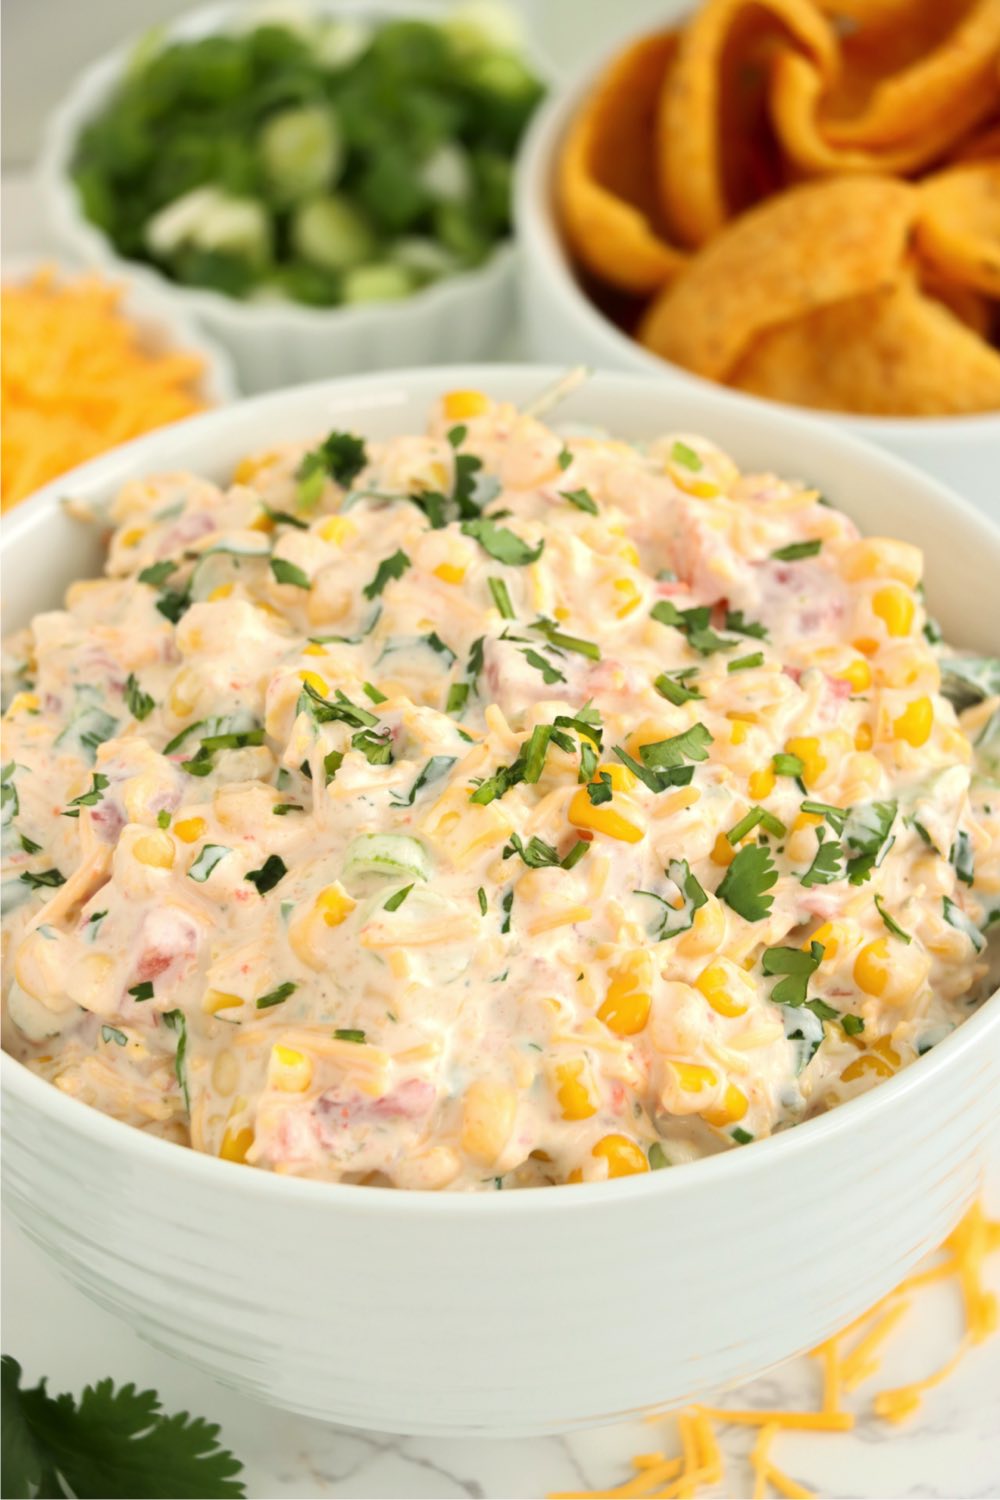 Bowl of Mexican corn dip garnished with cilantro